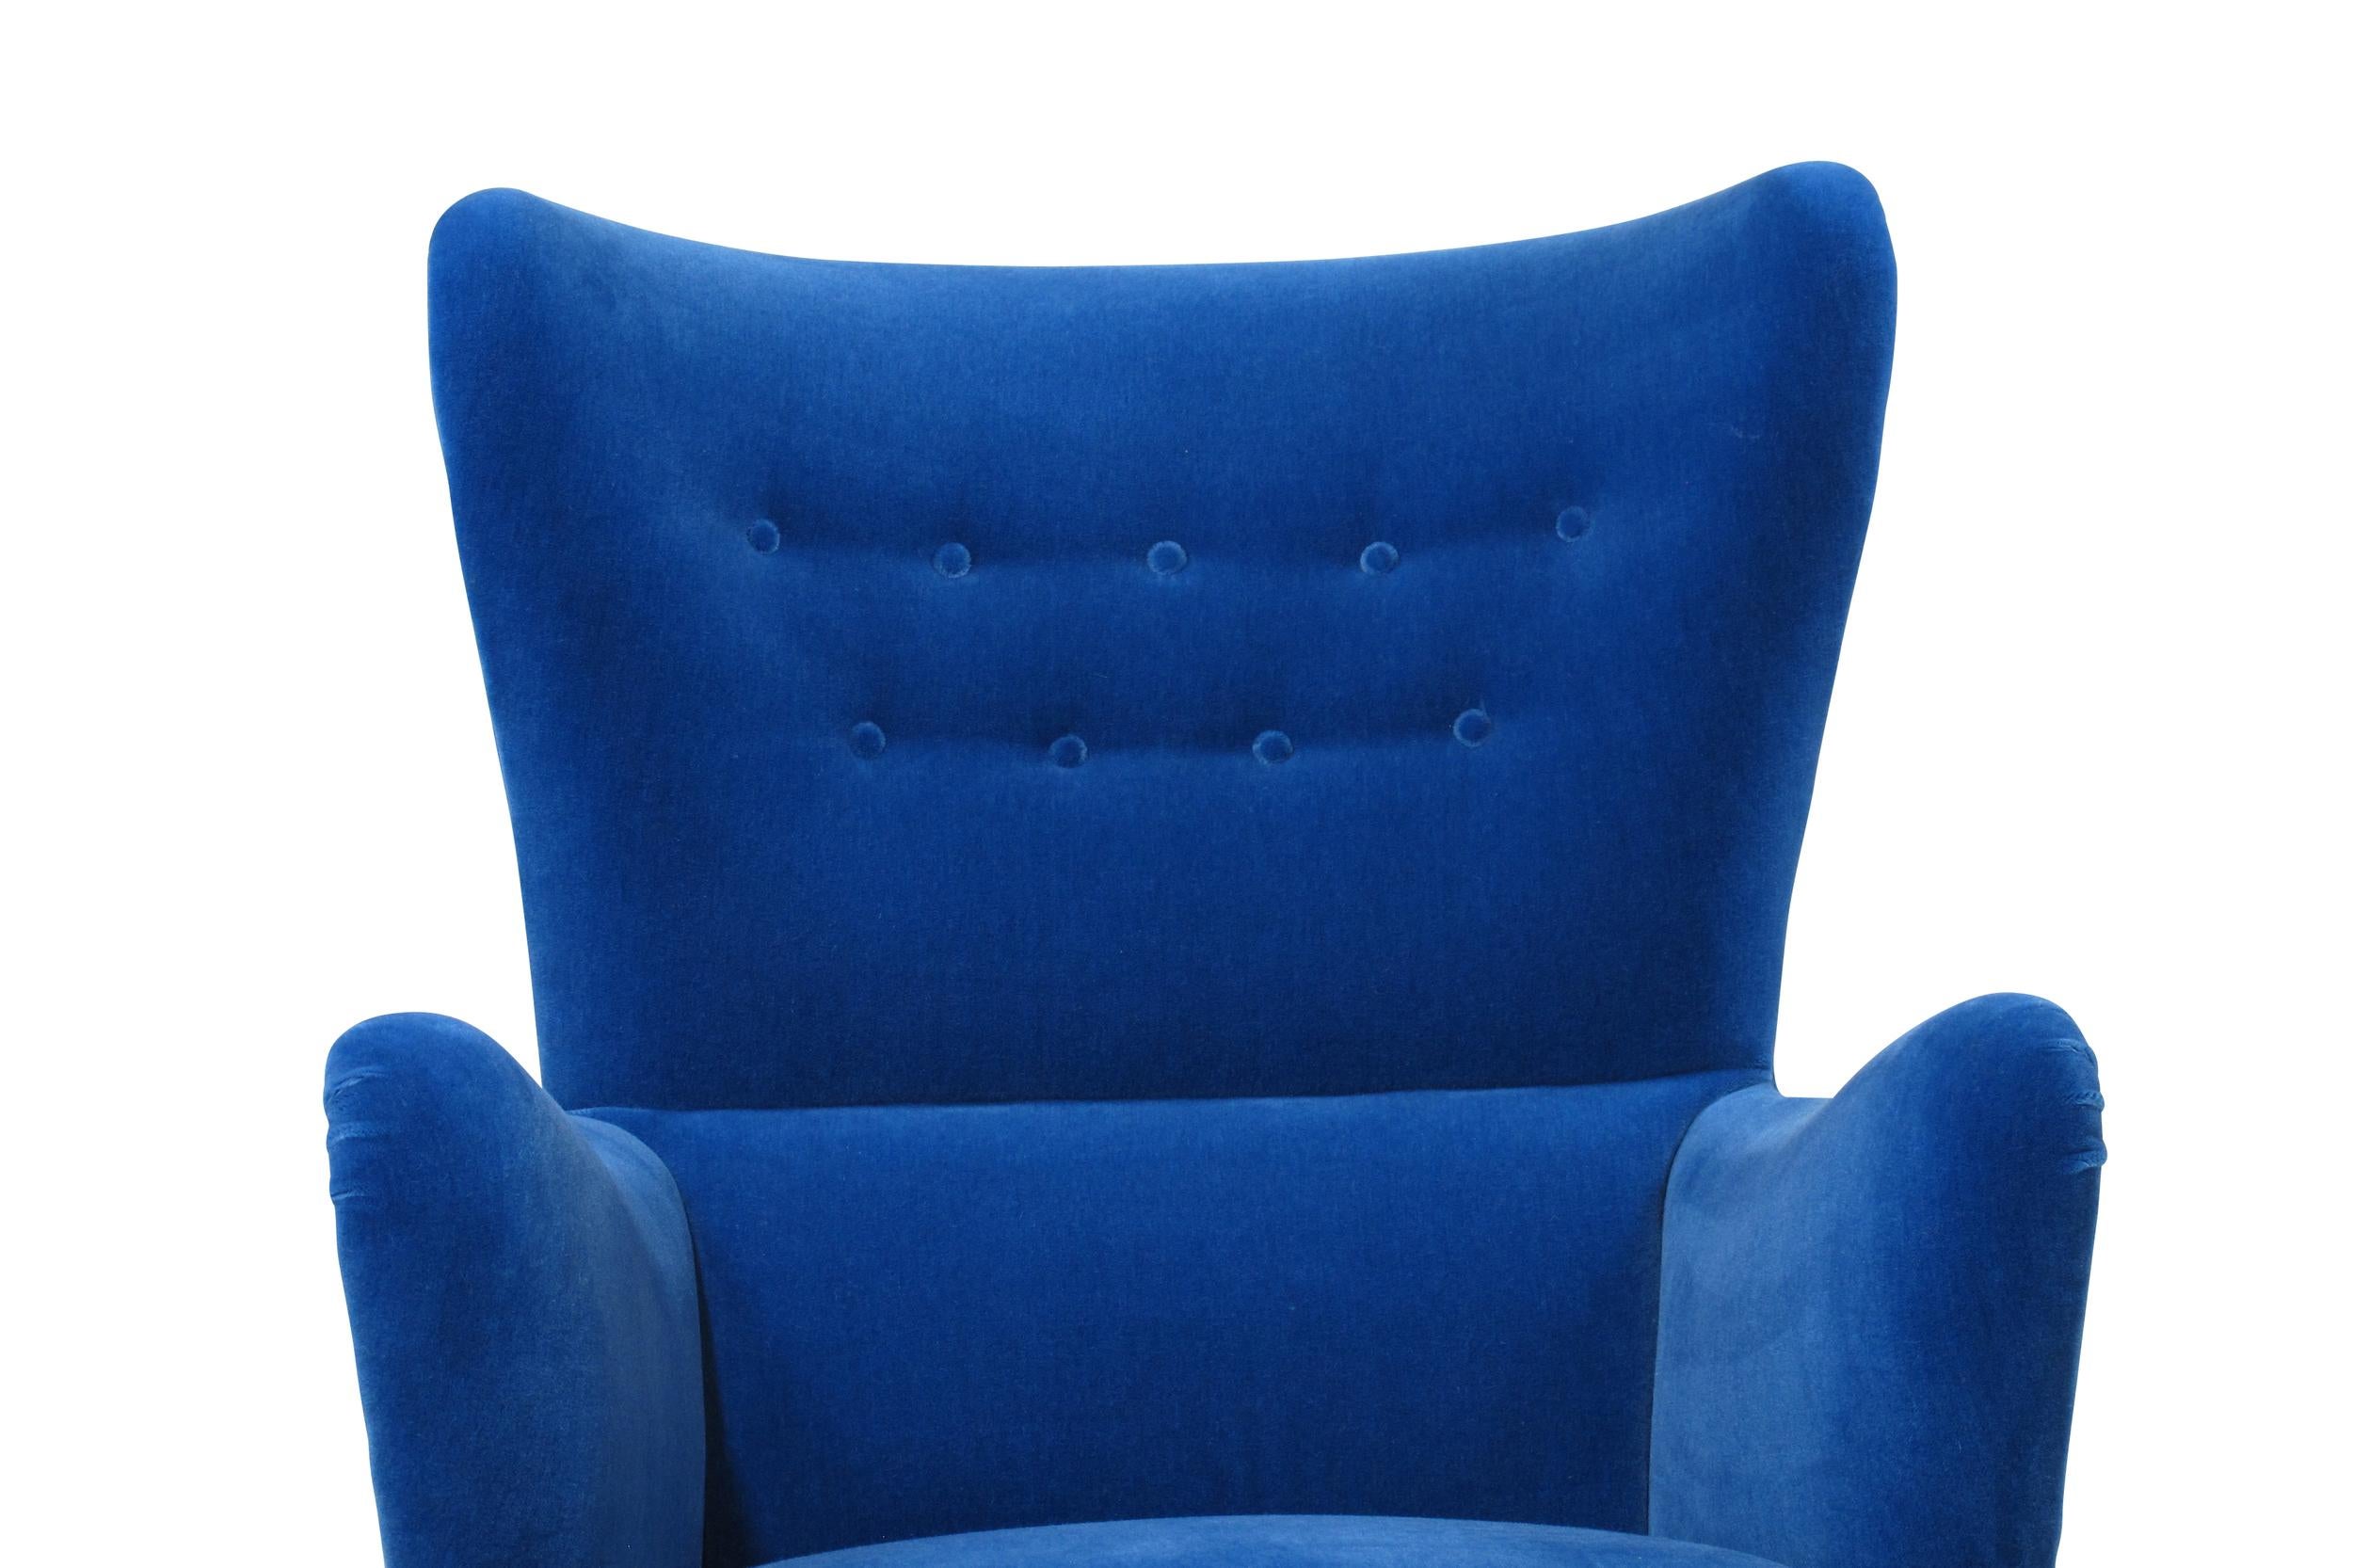 Midcentury Danish high back lounge chair crafted of a solid wood frame, with eight-way hand-tied springs in the seat, and horsehair padding. The curved button tufted backrest offers excellent back support. Newly upholstered in a blue mohair textile.